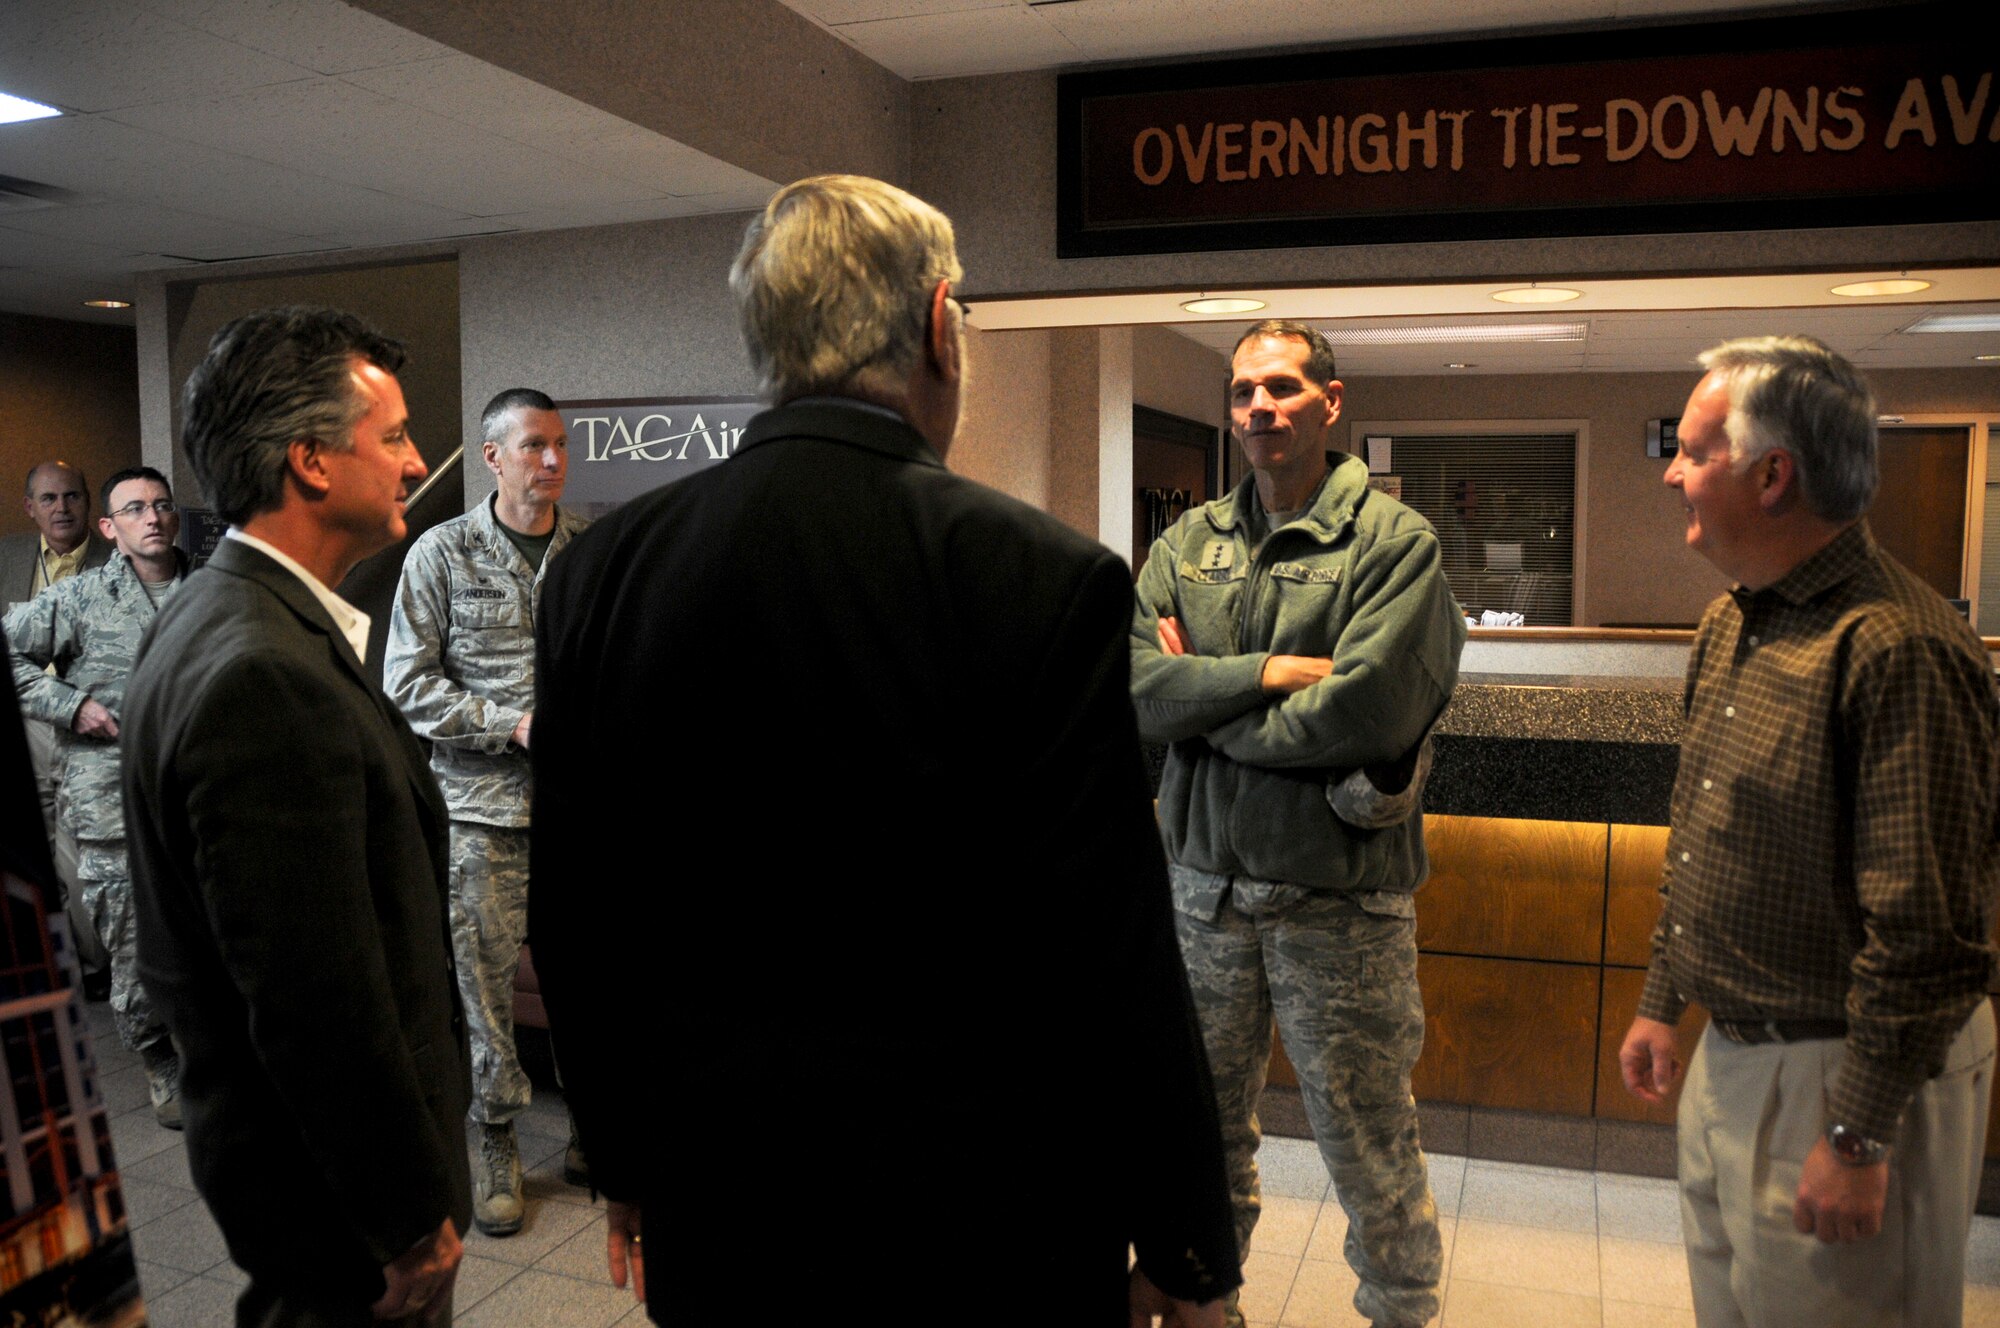 Lt. Gen. Stanley E. Clarke III, director of the Air National Guard, meets with city officials Dec. 5, 2014, at TACAir in Fort Smith, Ark.  to thank them for their support of the 188th Wing. Clarke toured the 188th Wing’s facilities, spoke with Airmen, and learned about the unit’s mission and contributions to the Air National Guard on his day-long visit. (U.S. Air National Guard photo by Airman 1st Class Cody Martin/released)